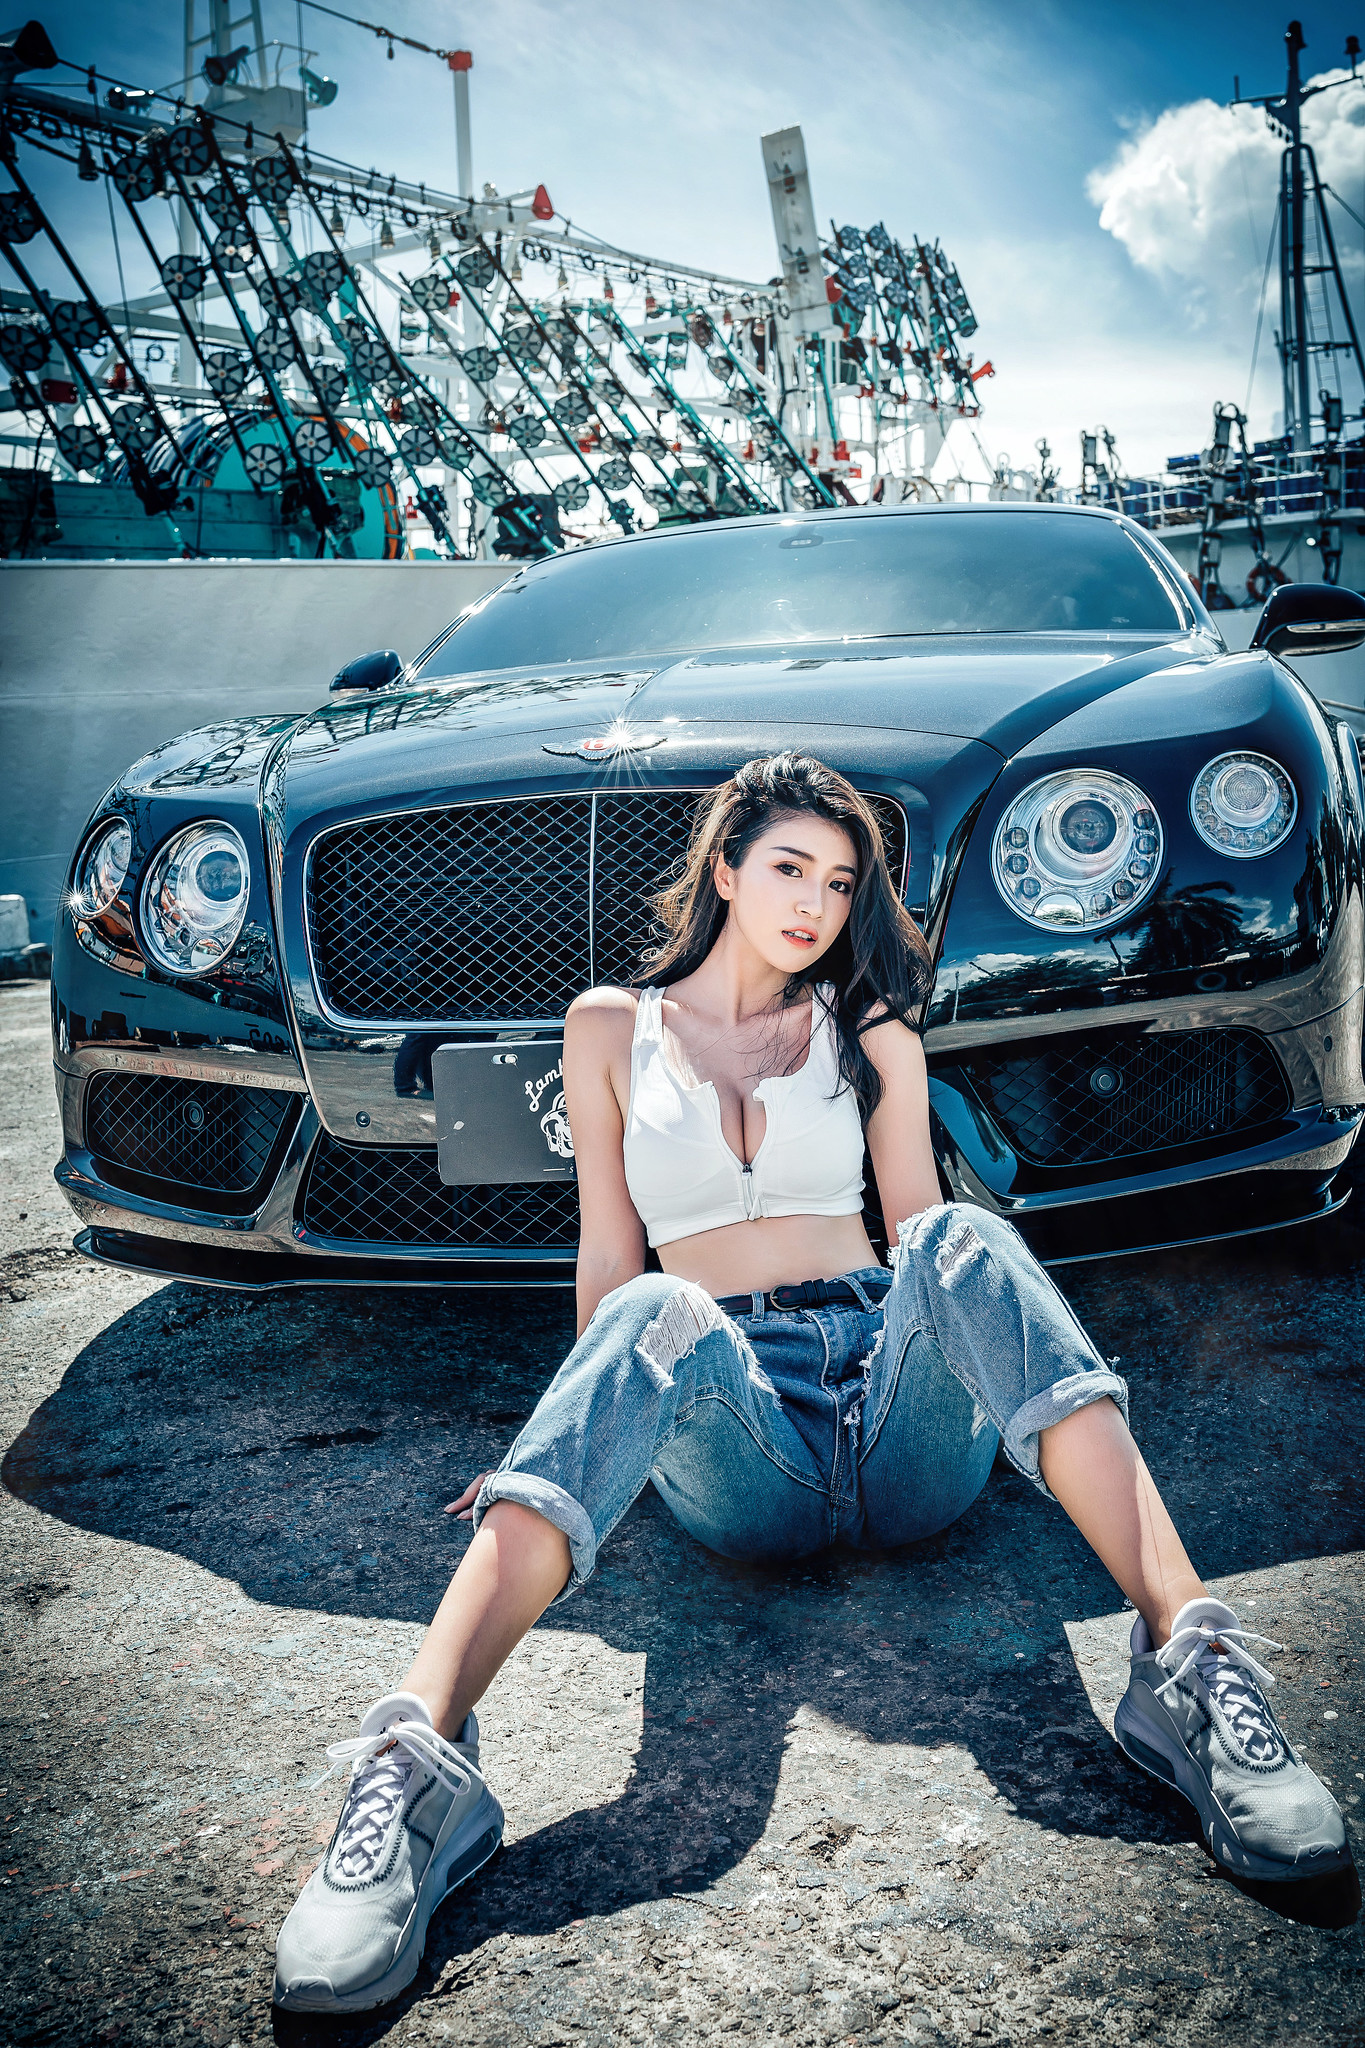 People 1365x2048 vehicle car Asian women model dark hair women with cars Bentley Bentley Continental Chinese cleavage tank top British cars Volkswagen Group